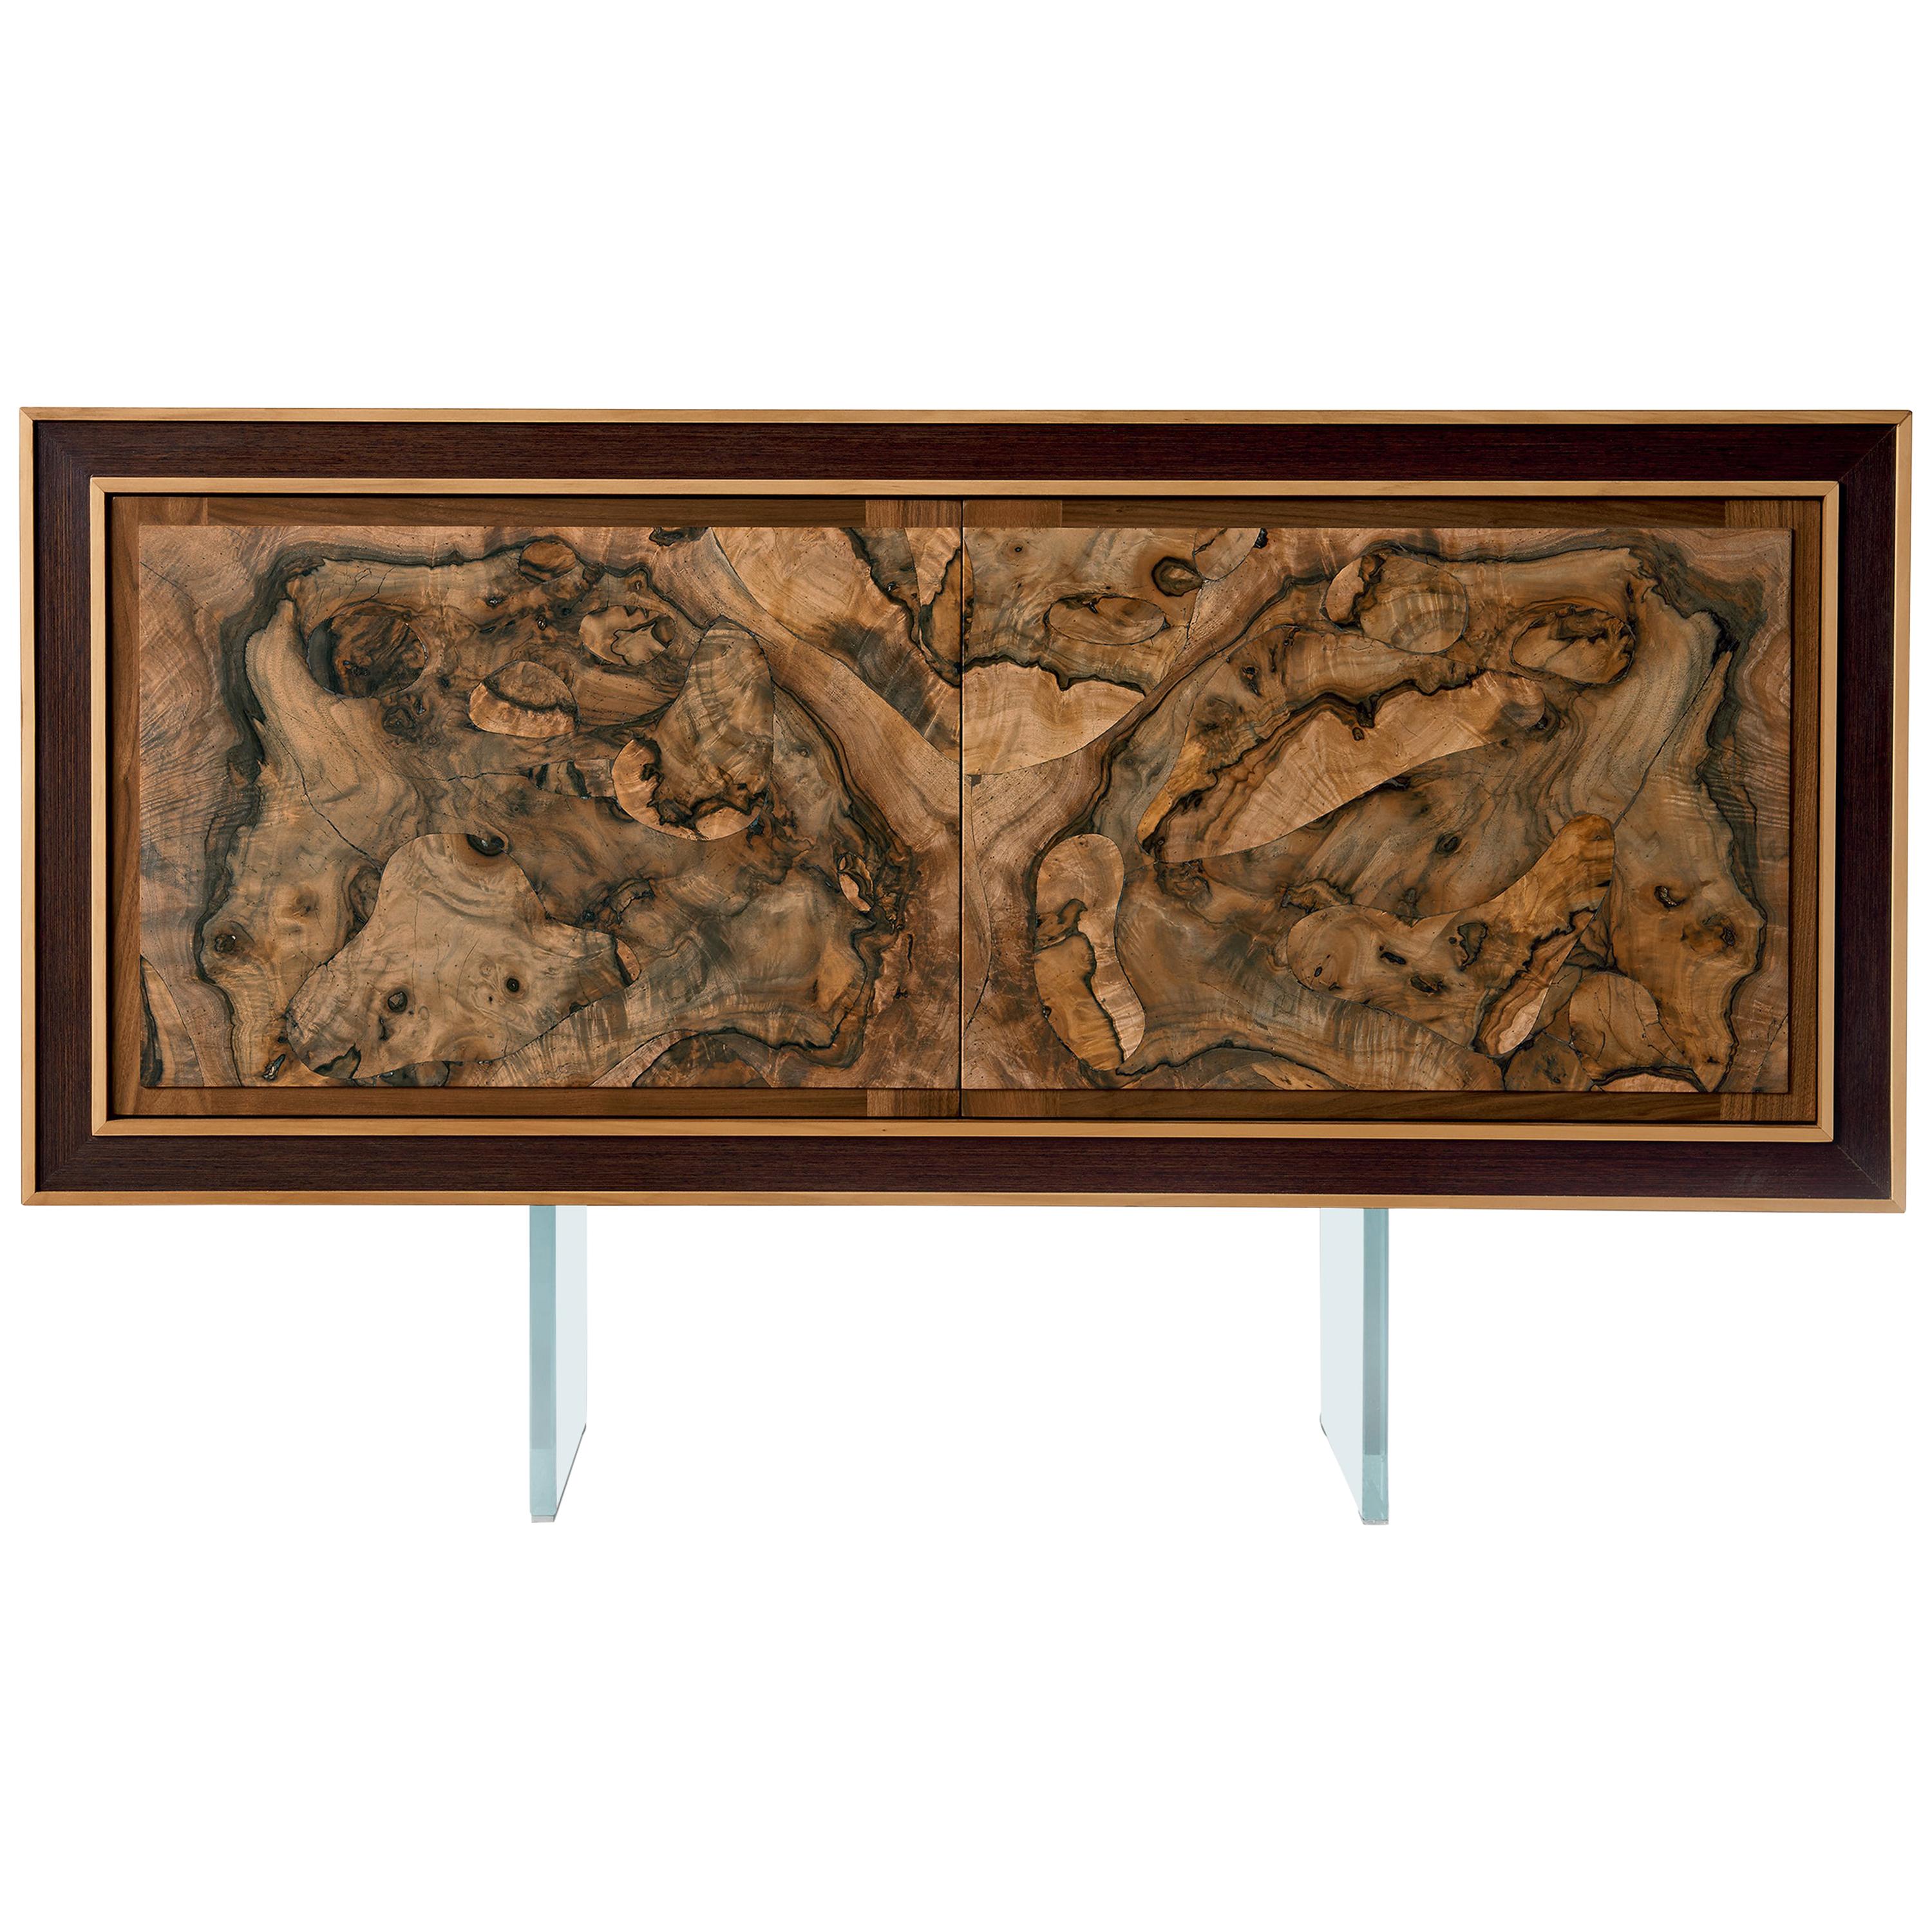 Quadra Solid Wood Sideboard, Walnut and Briar in Natural Finish, Contemporary